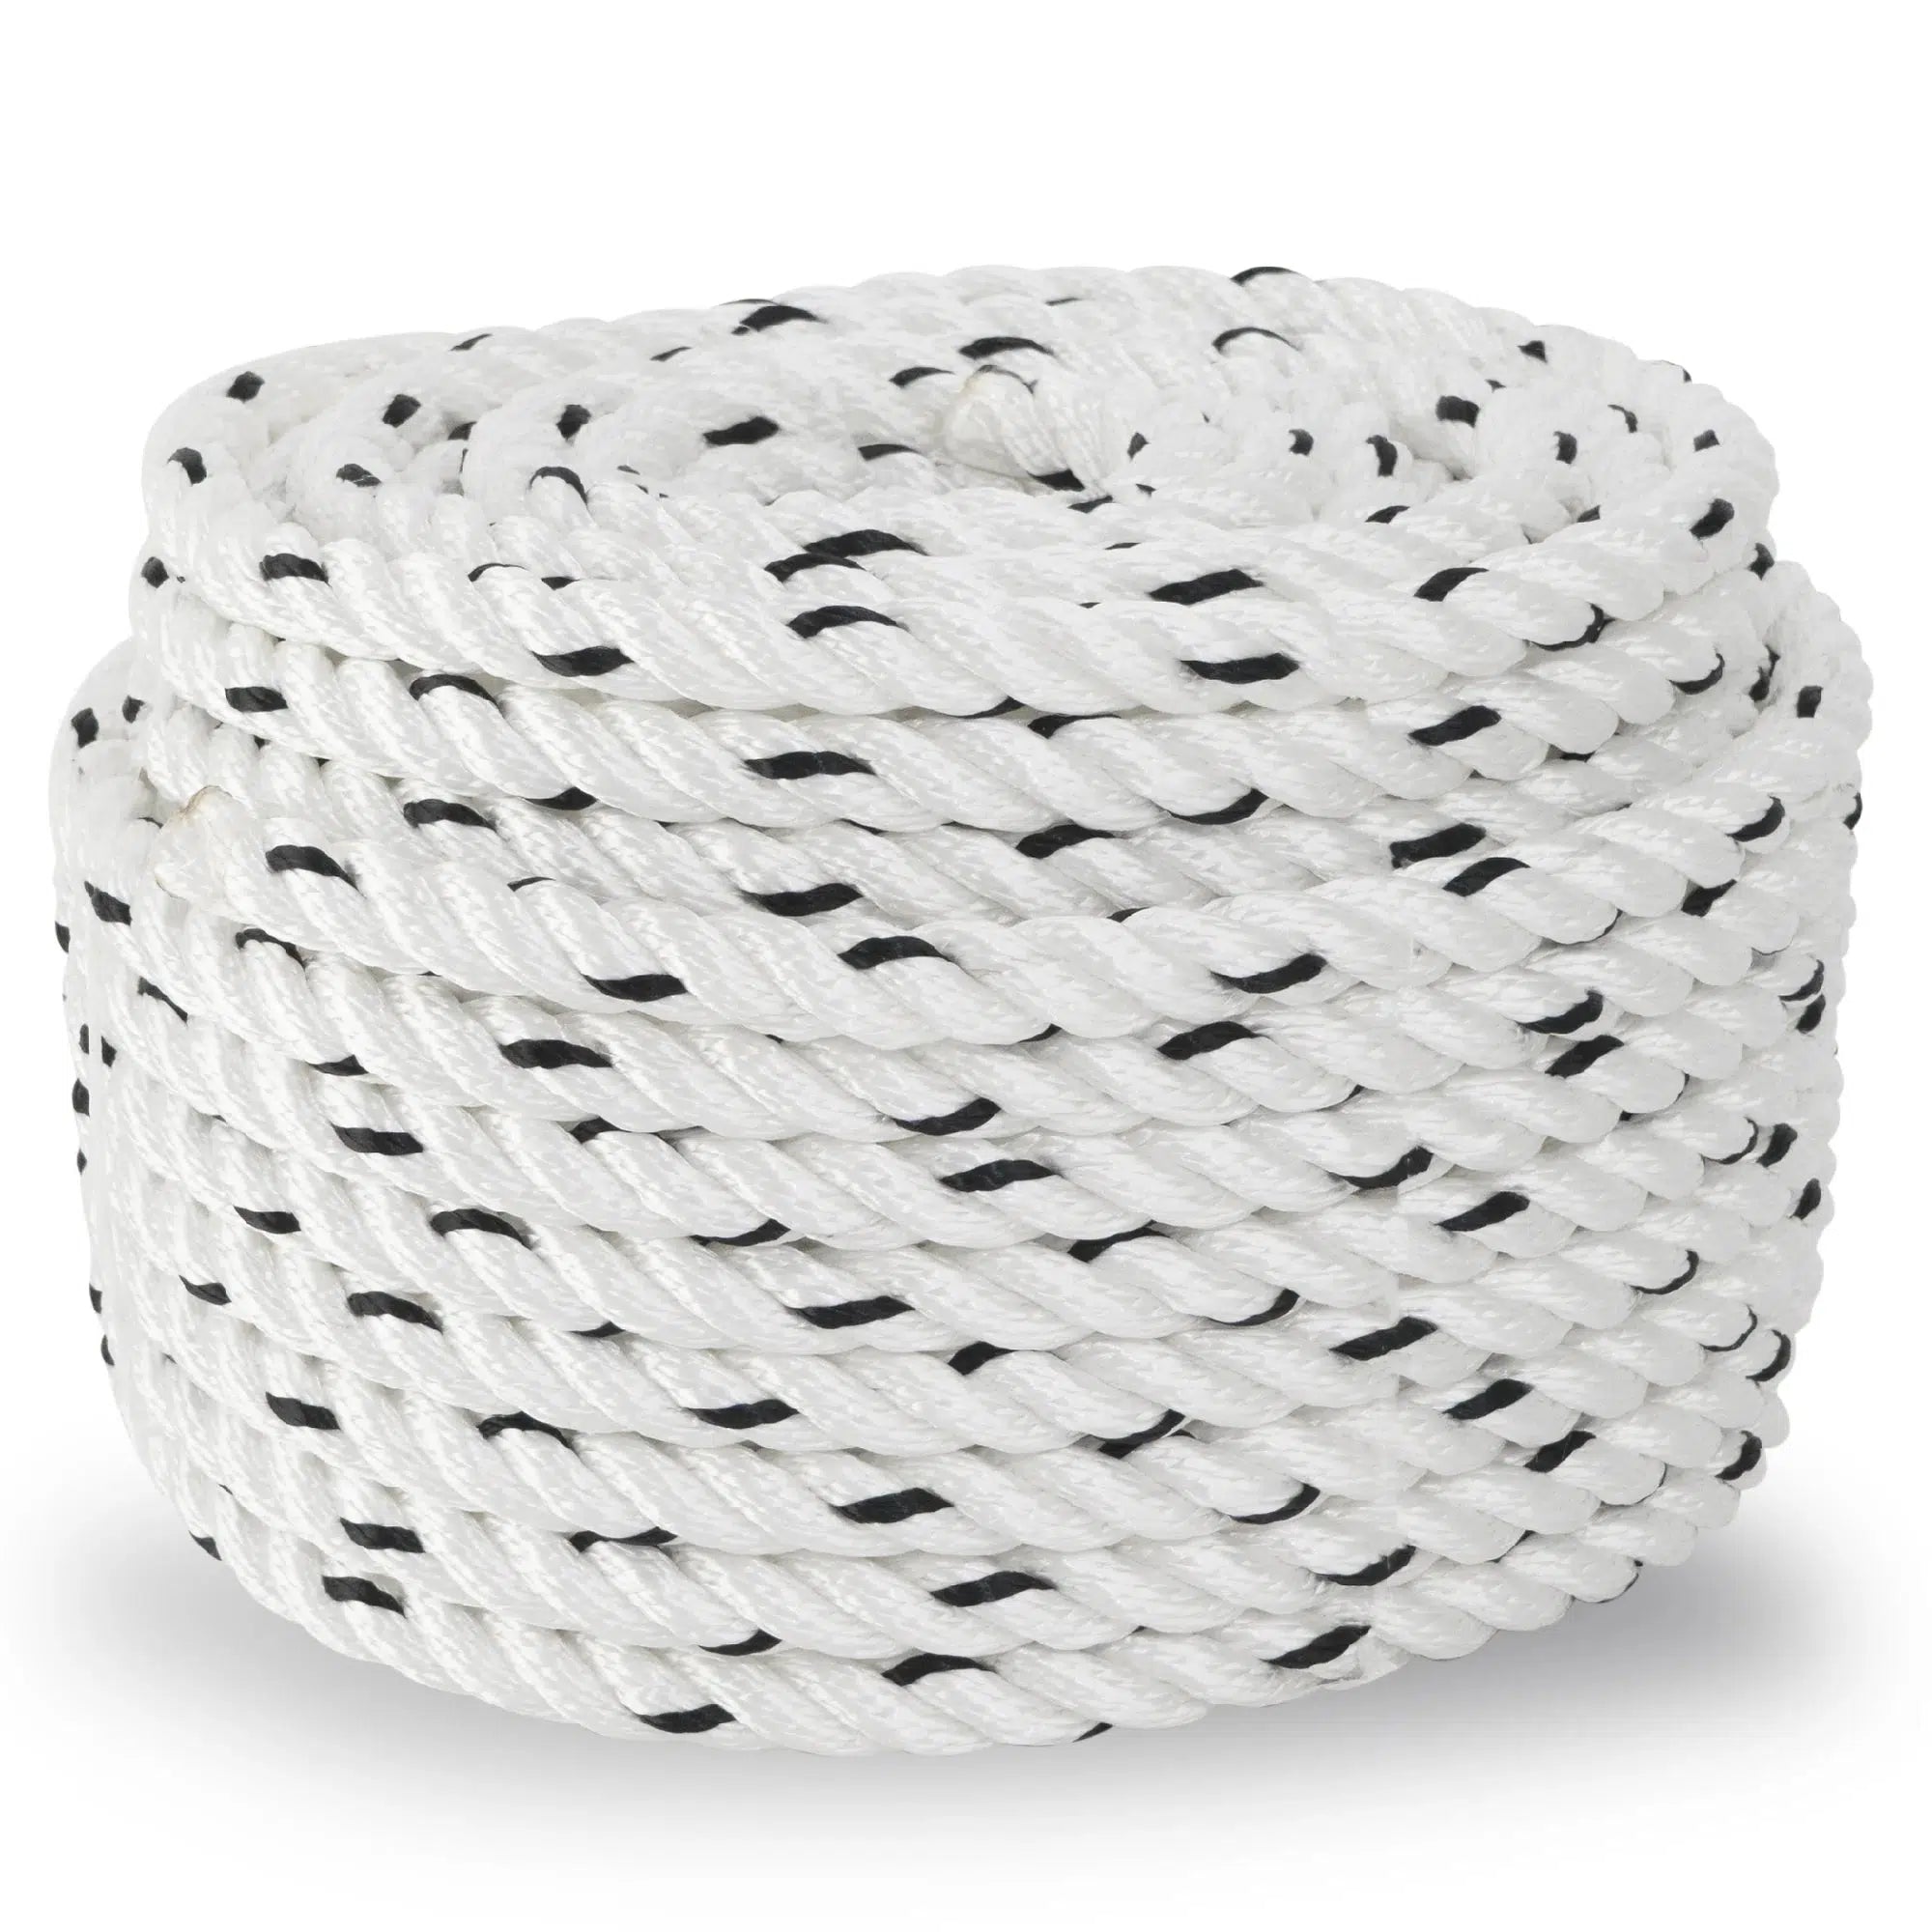 Anchor Rope Line 1/2" x 150', 3-Strand Nylon - Five Oceans-Canadian Marine &amp; Outdoor Equipment